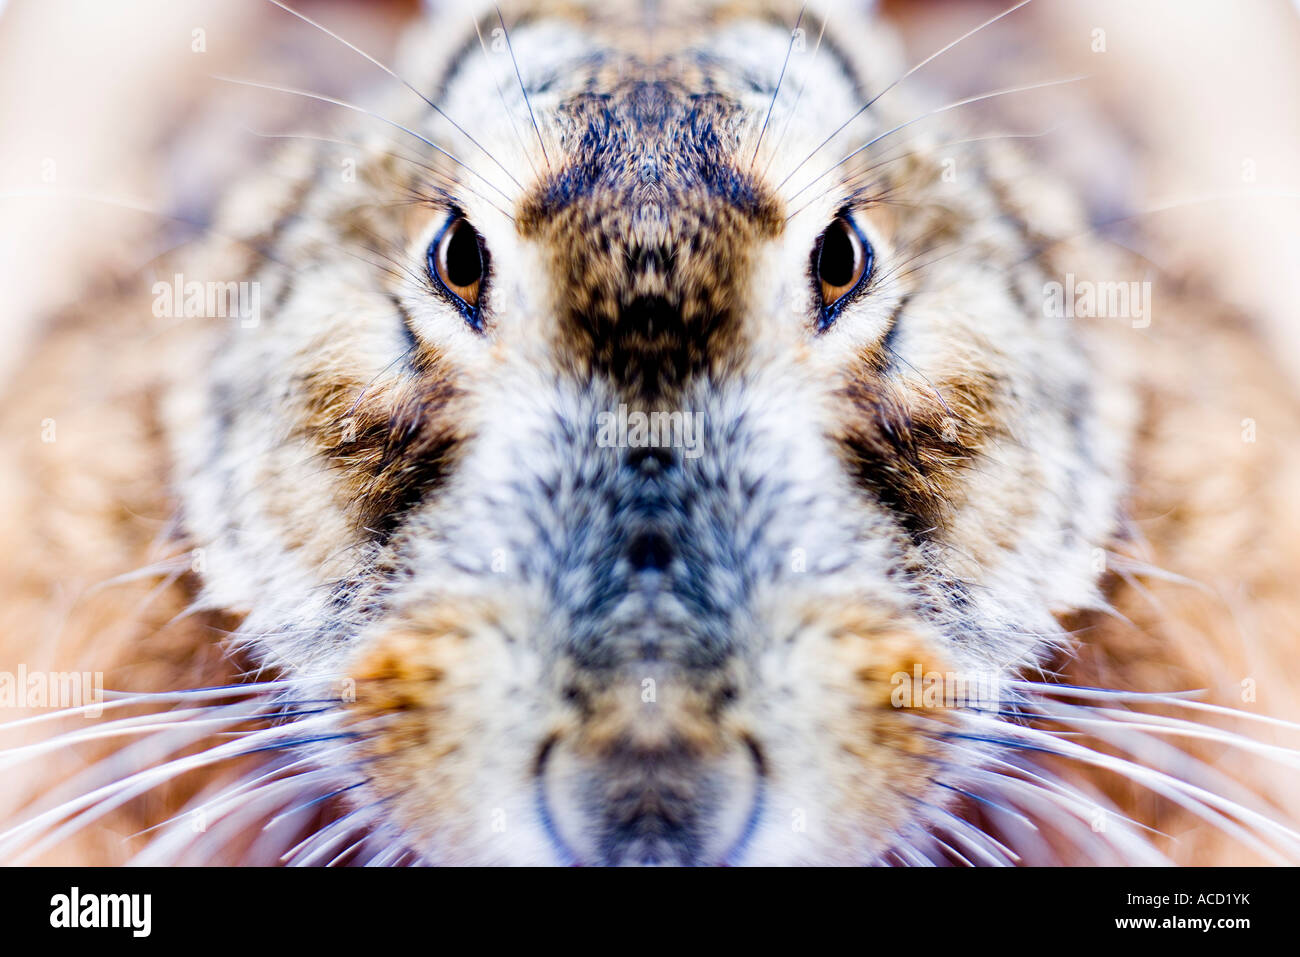 A close-up on a hare. Stock Photo